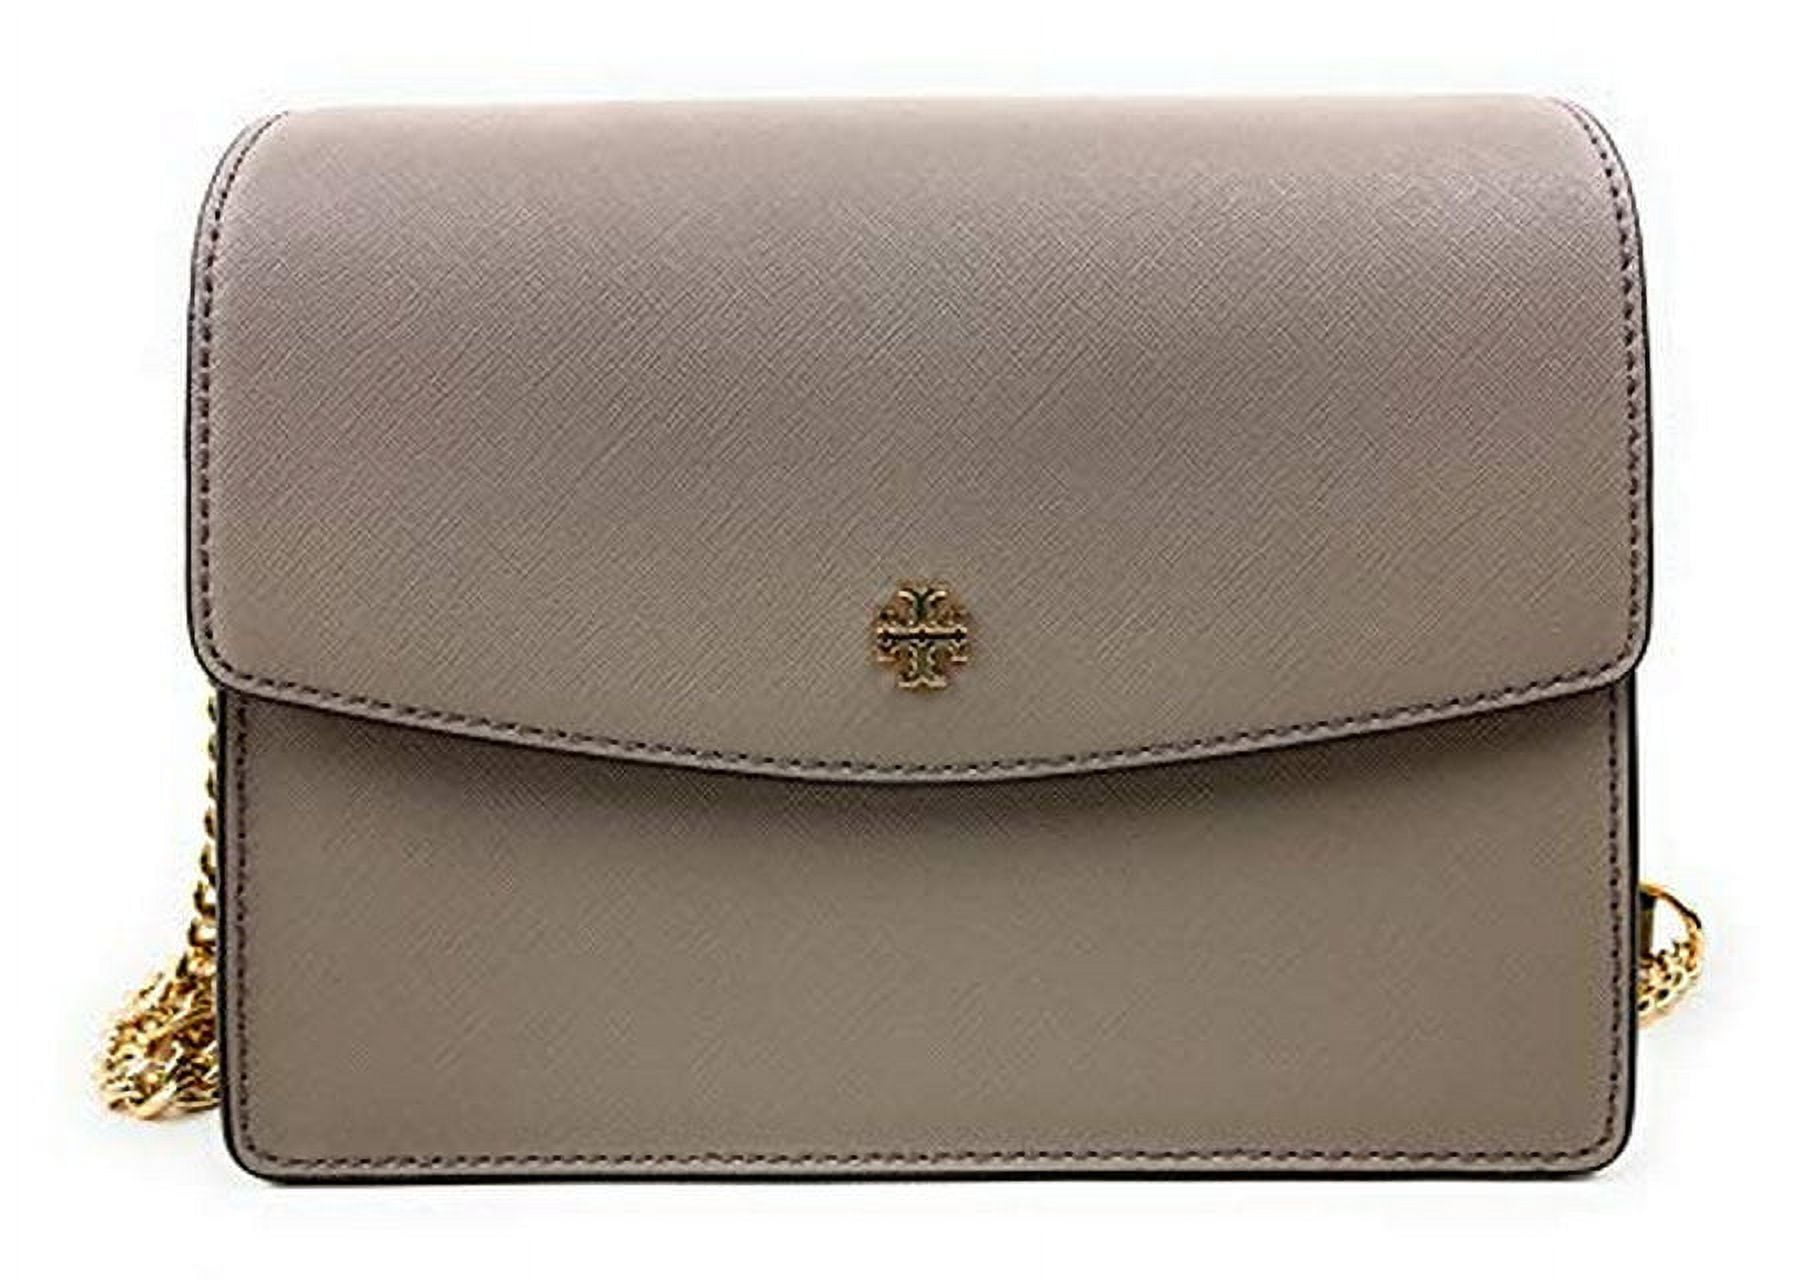 Tory Burch Emerson Chain Wallet Leather Cross Body France